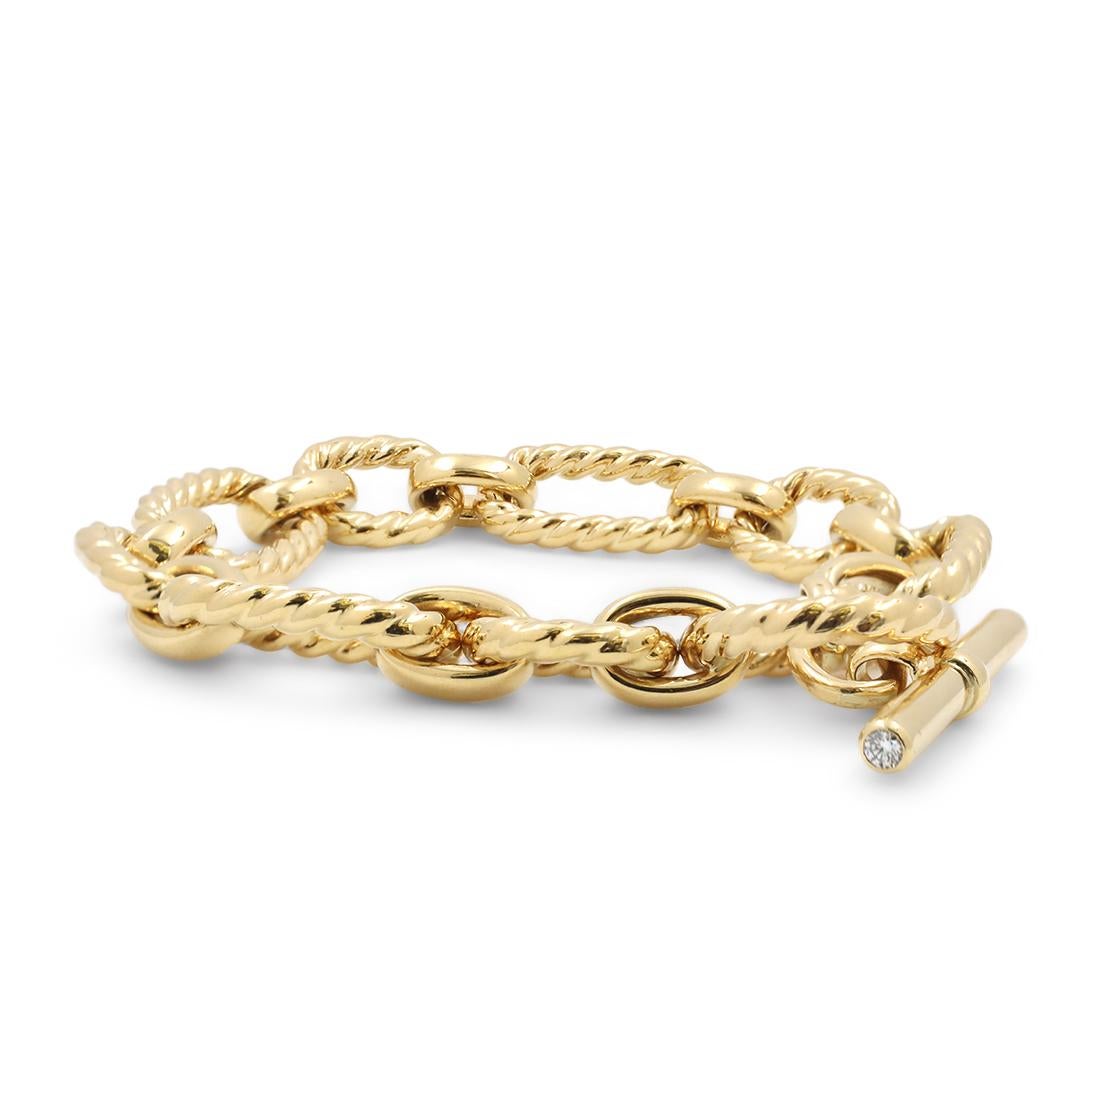 Authentic David Yurman bracelet crafted in 18 karat yellow gold comprised of high-polished links inspired by David Yurman's classic cable design and featuring two round brilliant cut diamonds in the toggle. The bracelet measures 7 1/2 inches in